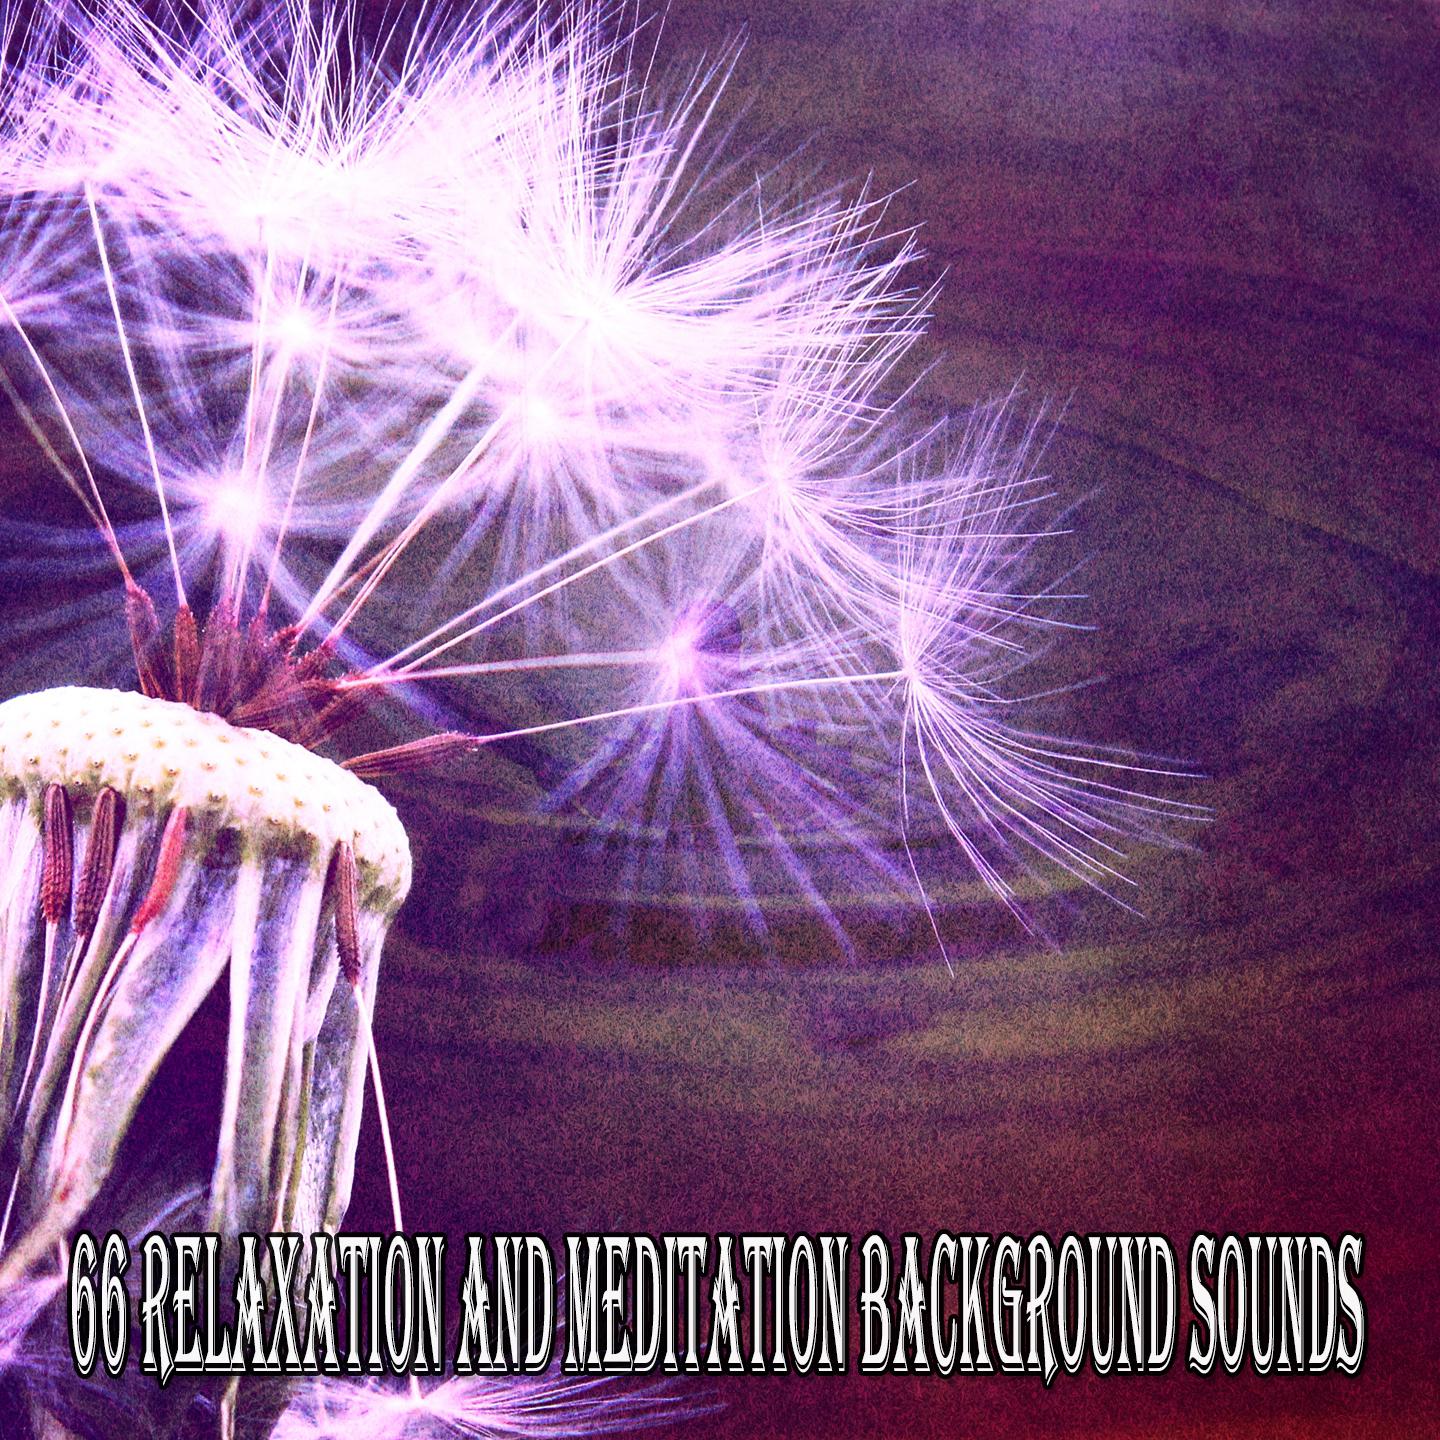 66 Relaxation and Meditation Background Sounds